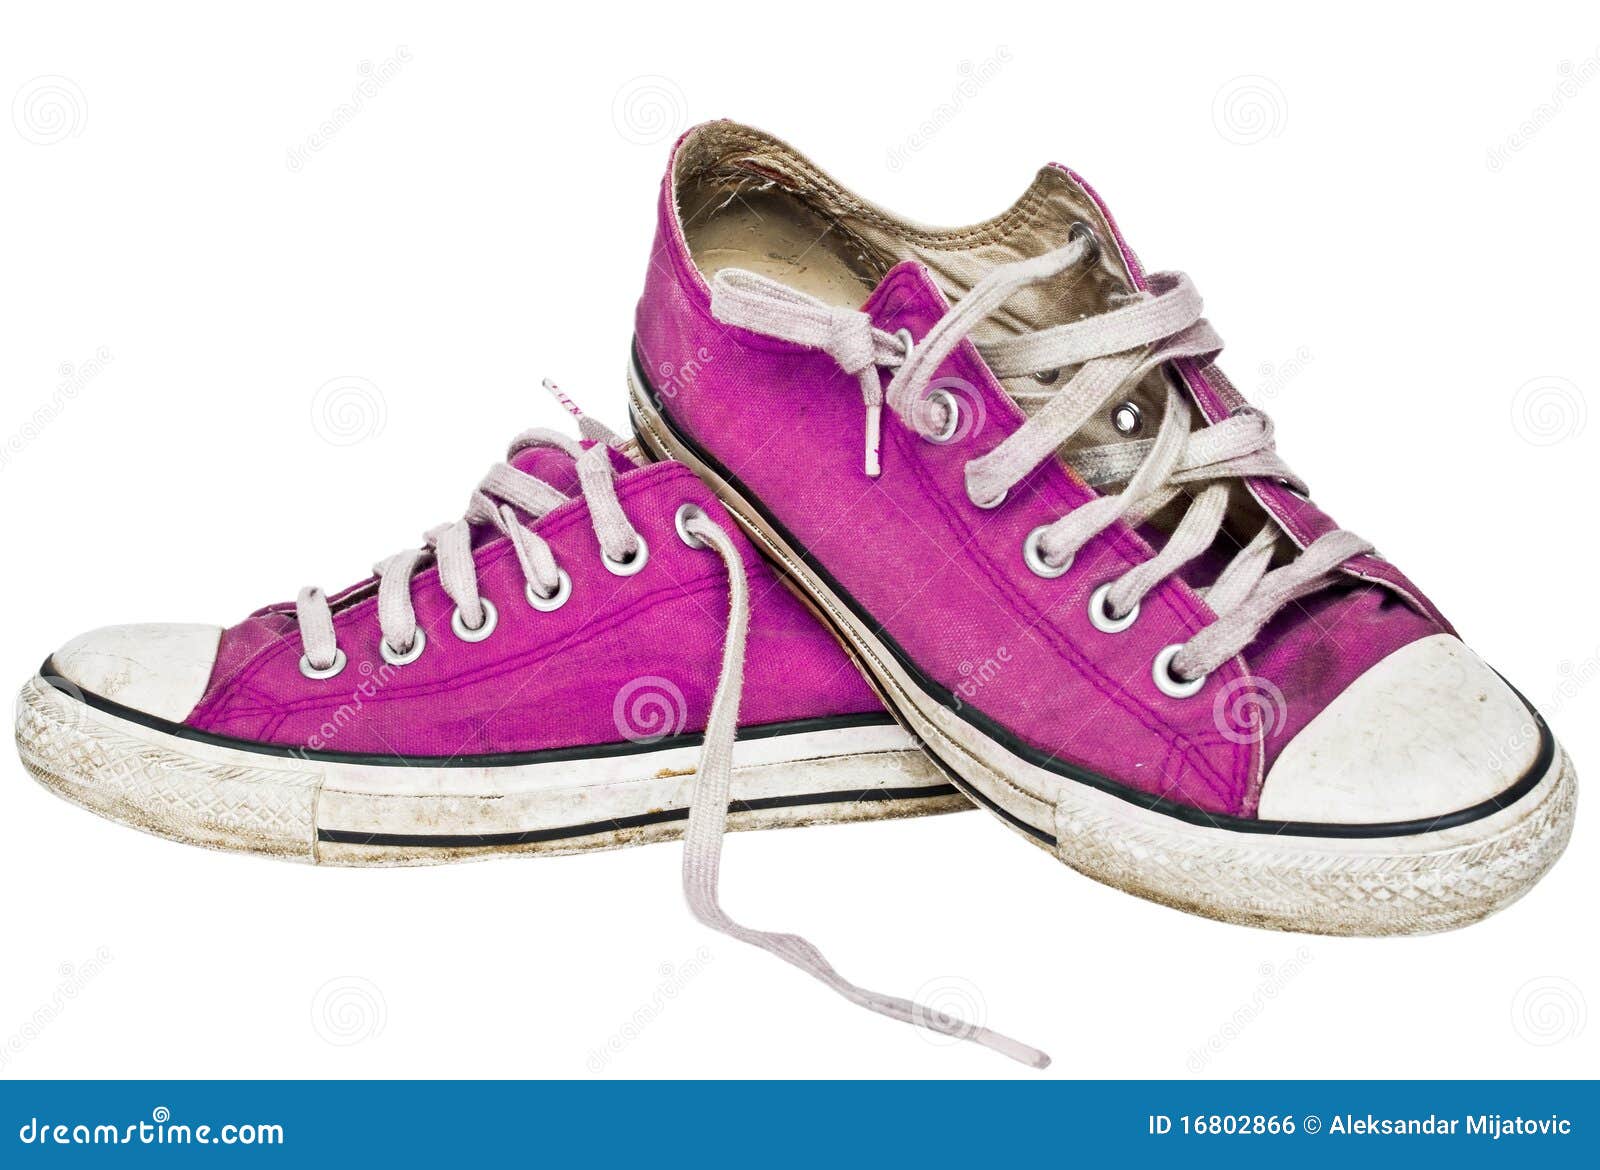 Retro pink sneakers stock photo. Image of comfortable - 16802866